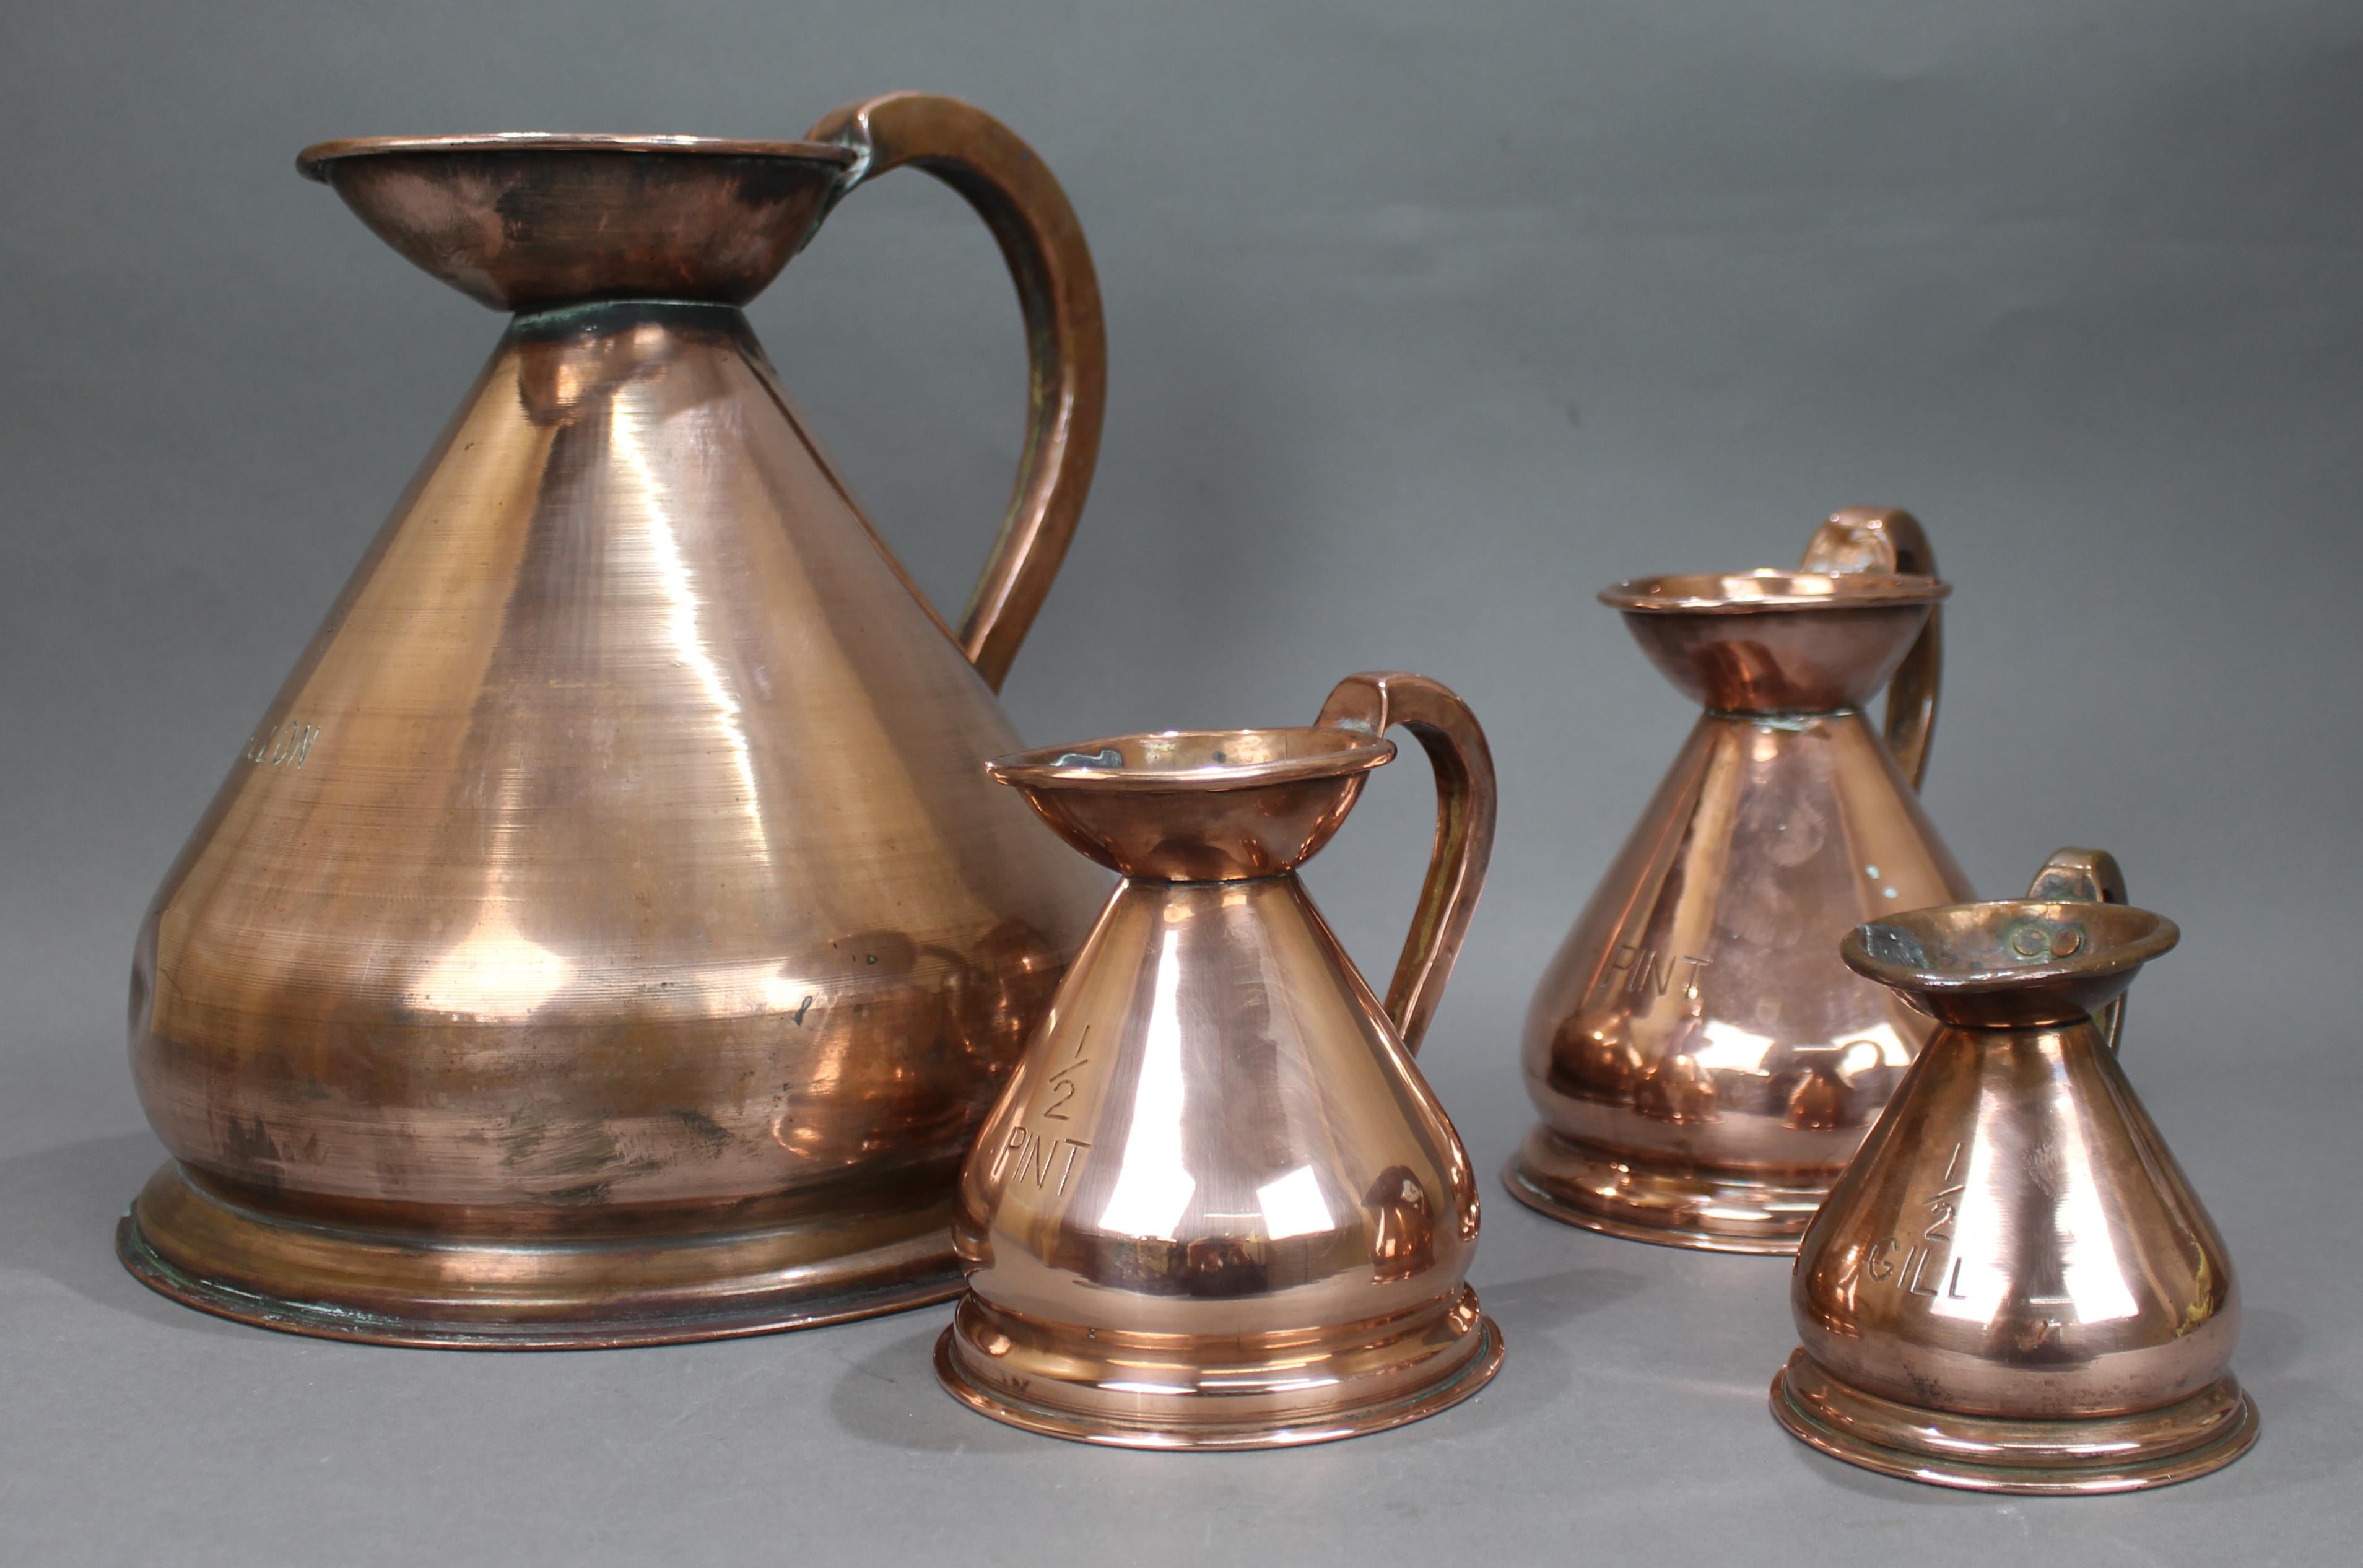 Set of 4 Early Victorian Graduated Copper Measuring jugs


Original antique, early Victorian, English.

Set of 4 Haystack measures; 1 gallon, 1 pint, 1/2 pint & 1/2 gill

Heights from 10 cm to 29 cm.

Makers mark to the top inside